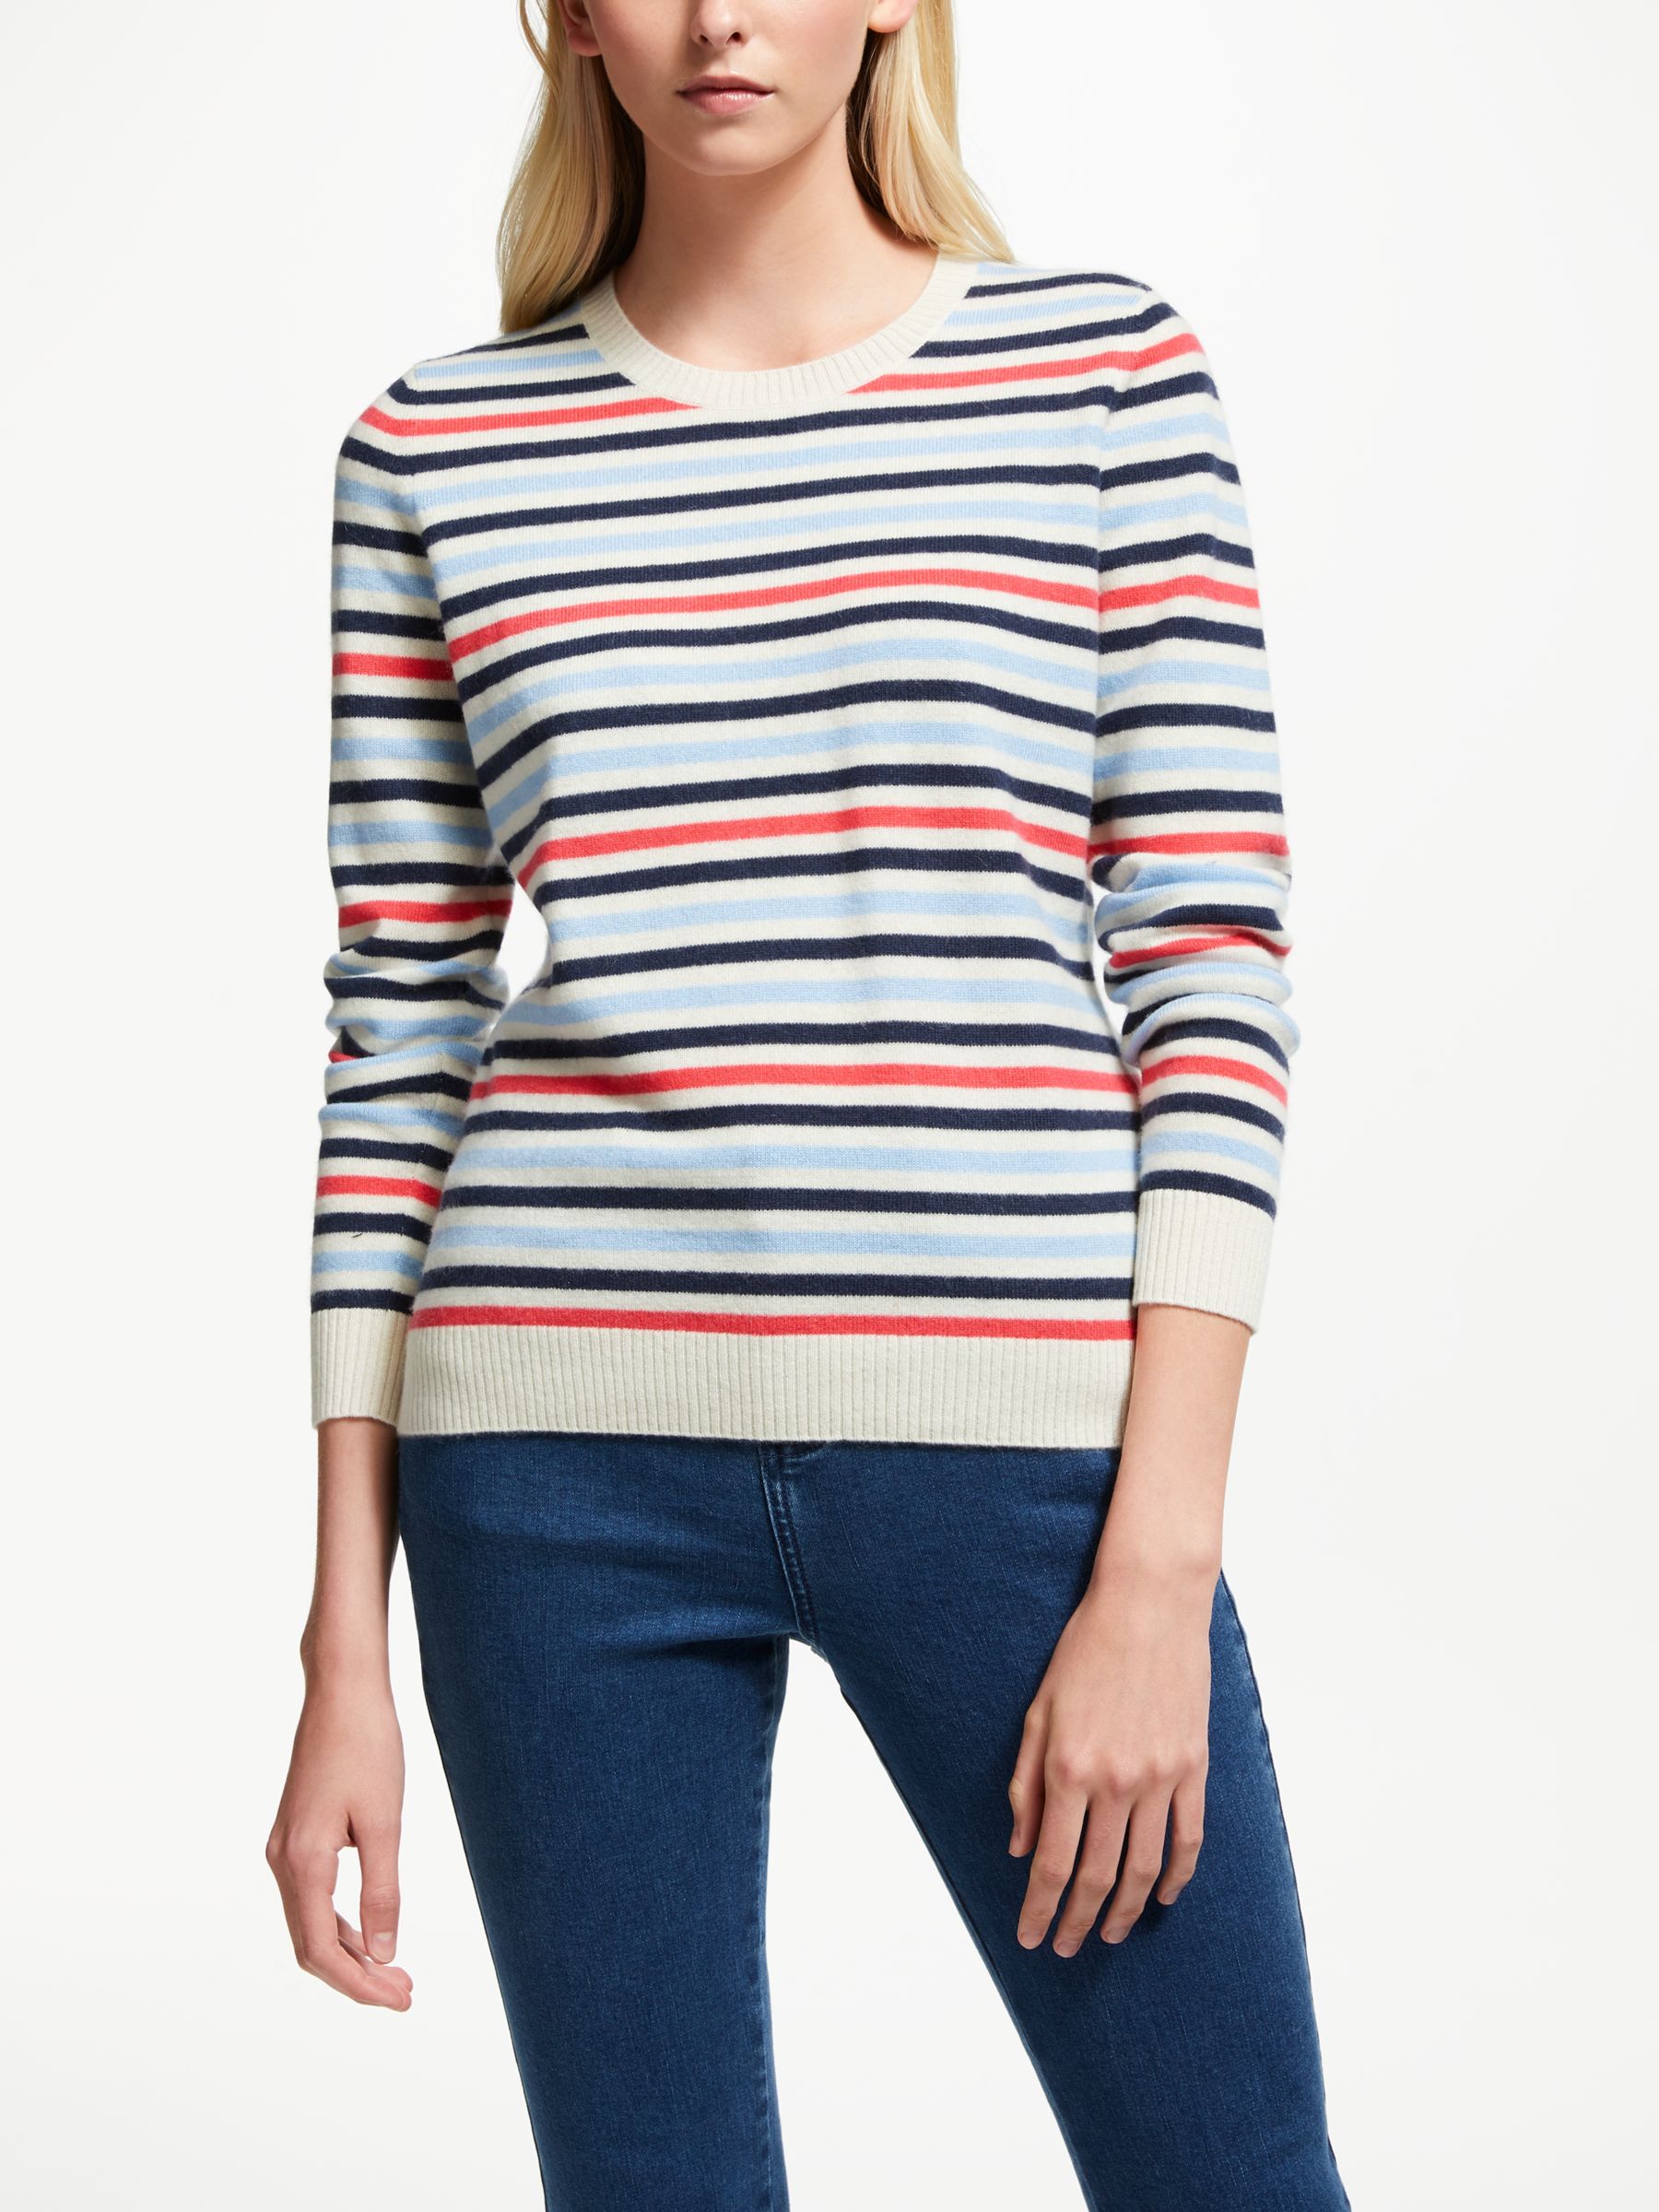 Collection WEEKEND by John Lewis Cashmere Crew Neck Stripe Jumper, Navy Multi